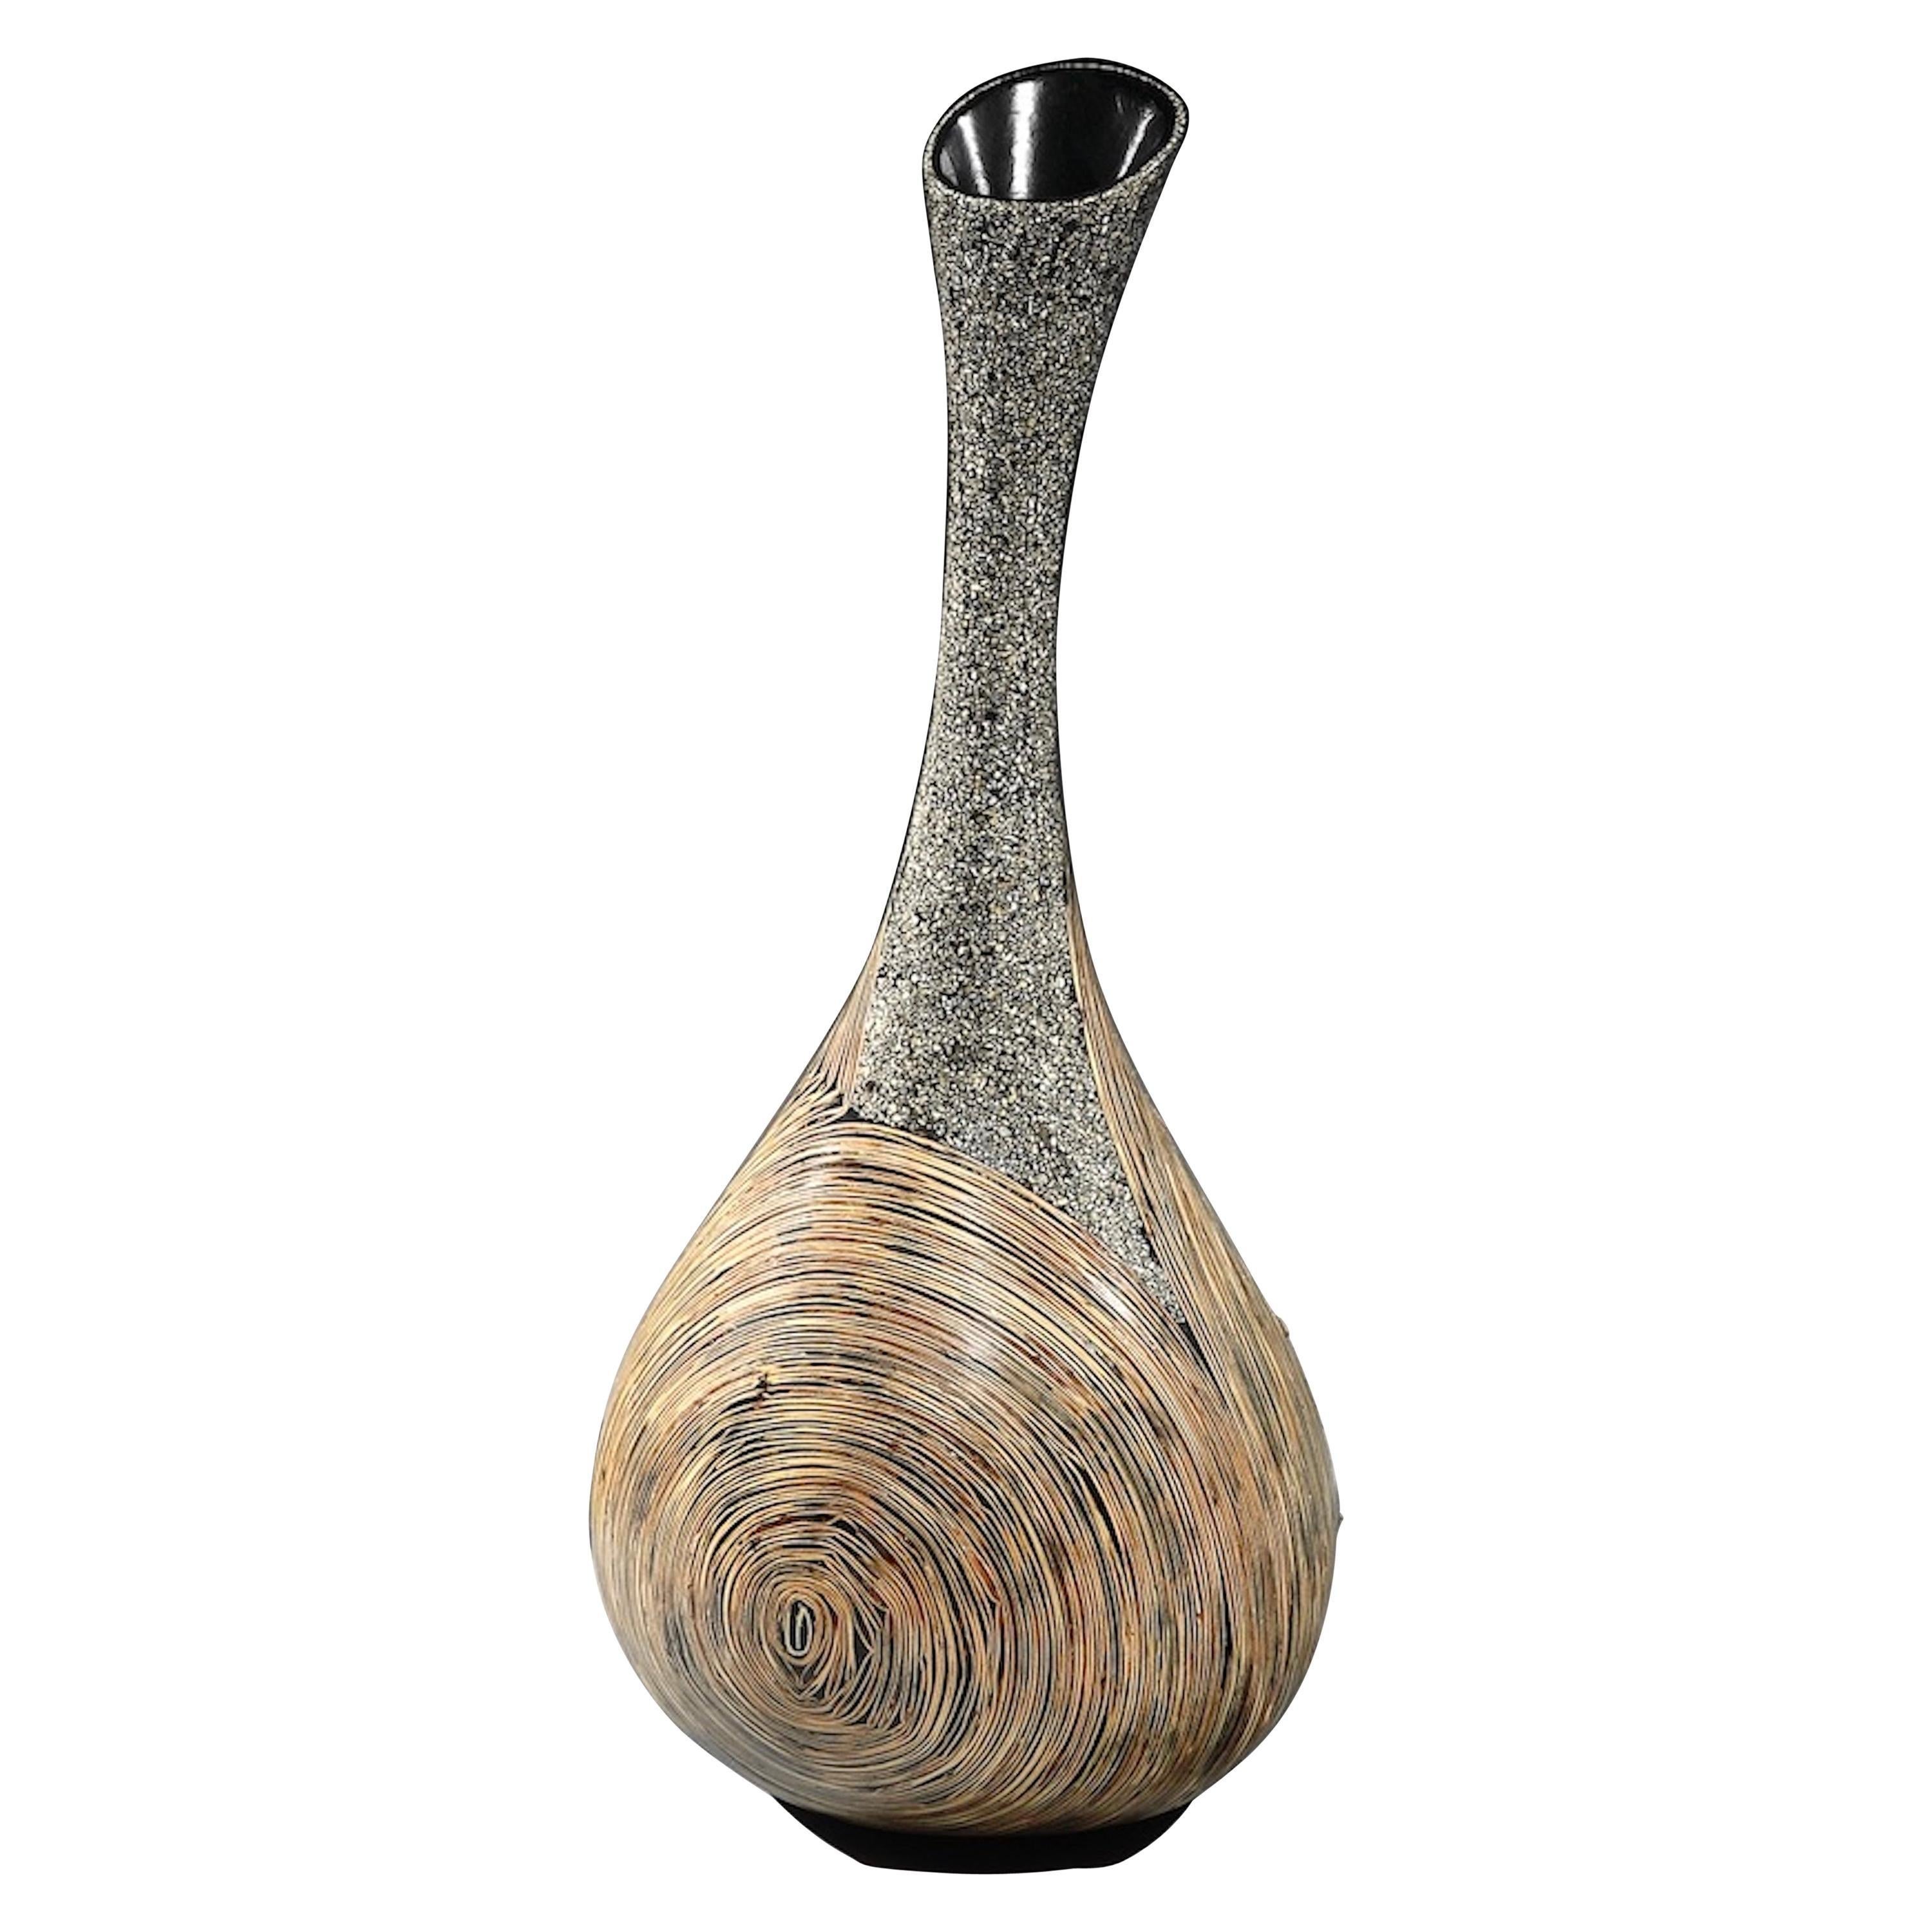 Lusia Robinson: Infinity Vase 
- This vase is characteristic of Robinson’s work emphasizing materiality within form integrating indigenous materials with modern technology and applications 
- The open lip, sweeping neck and round body create a fluid